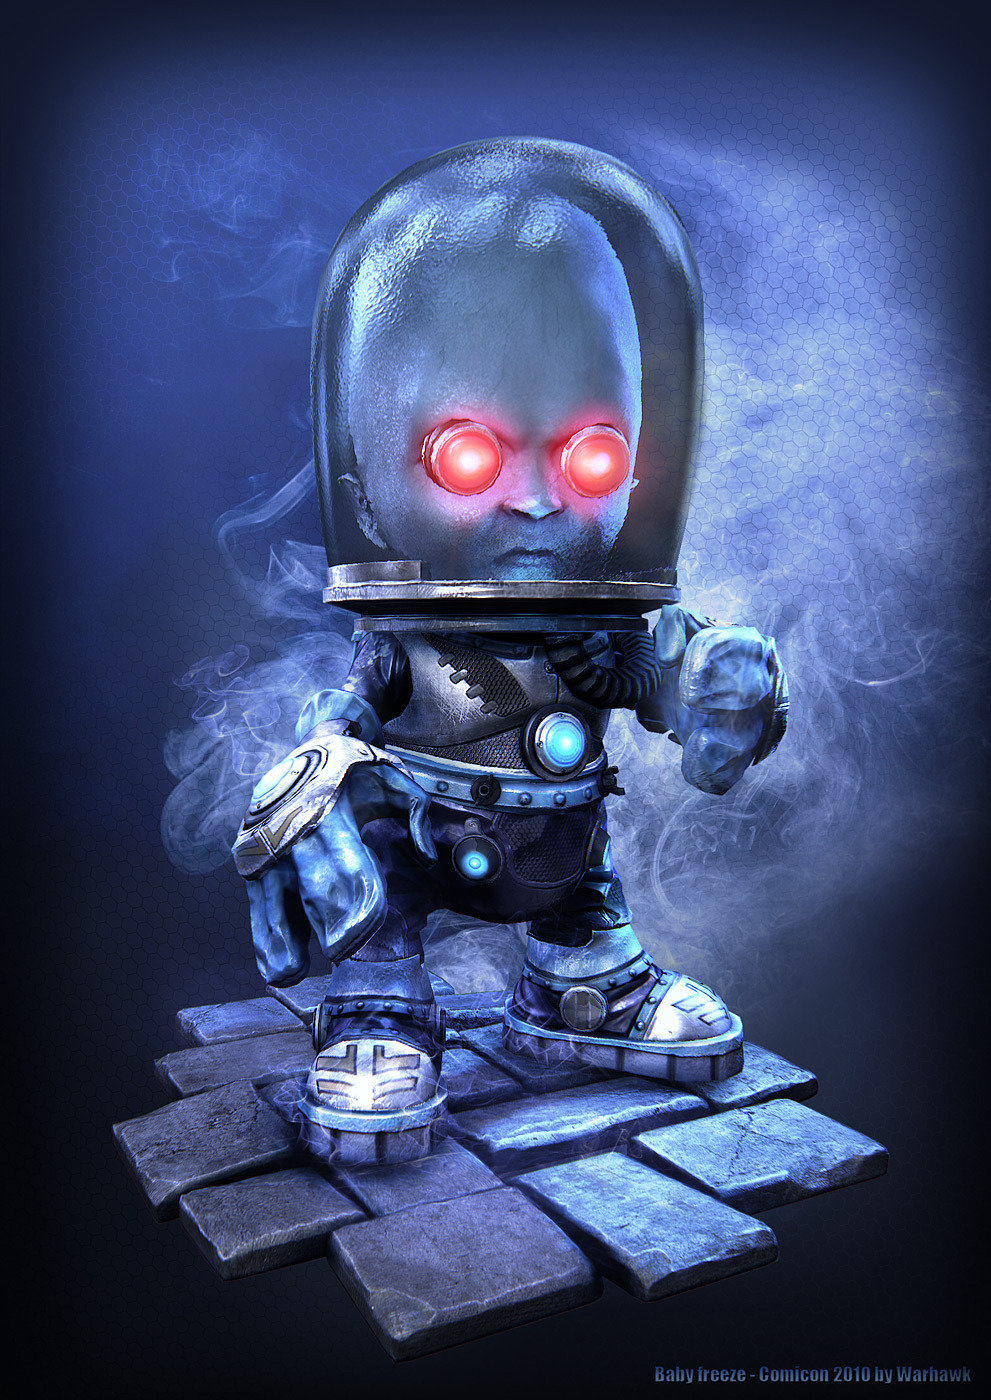 A baby mr. Freeze.